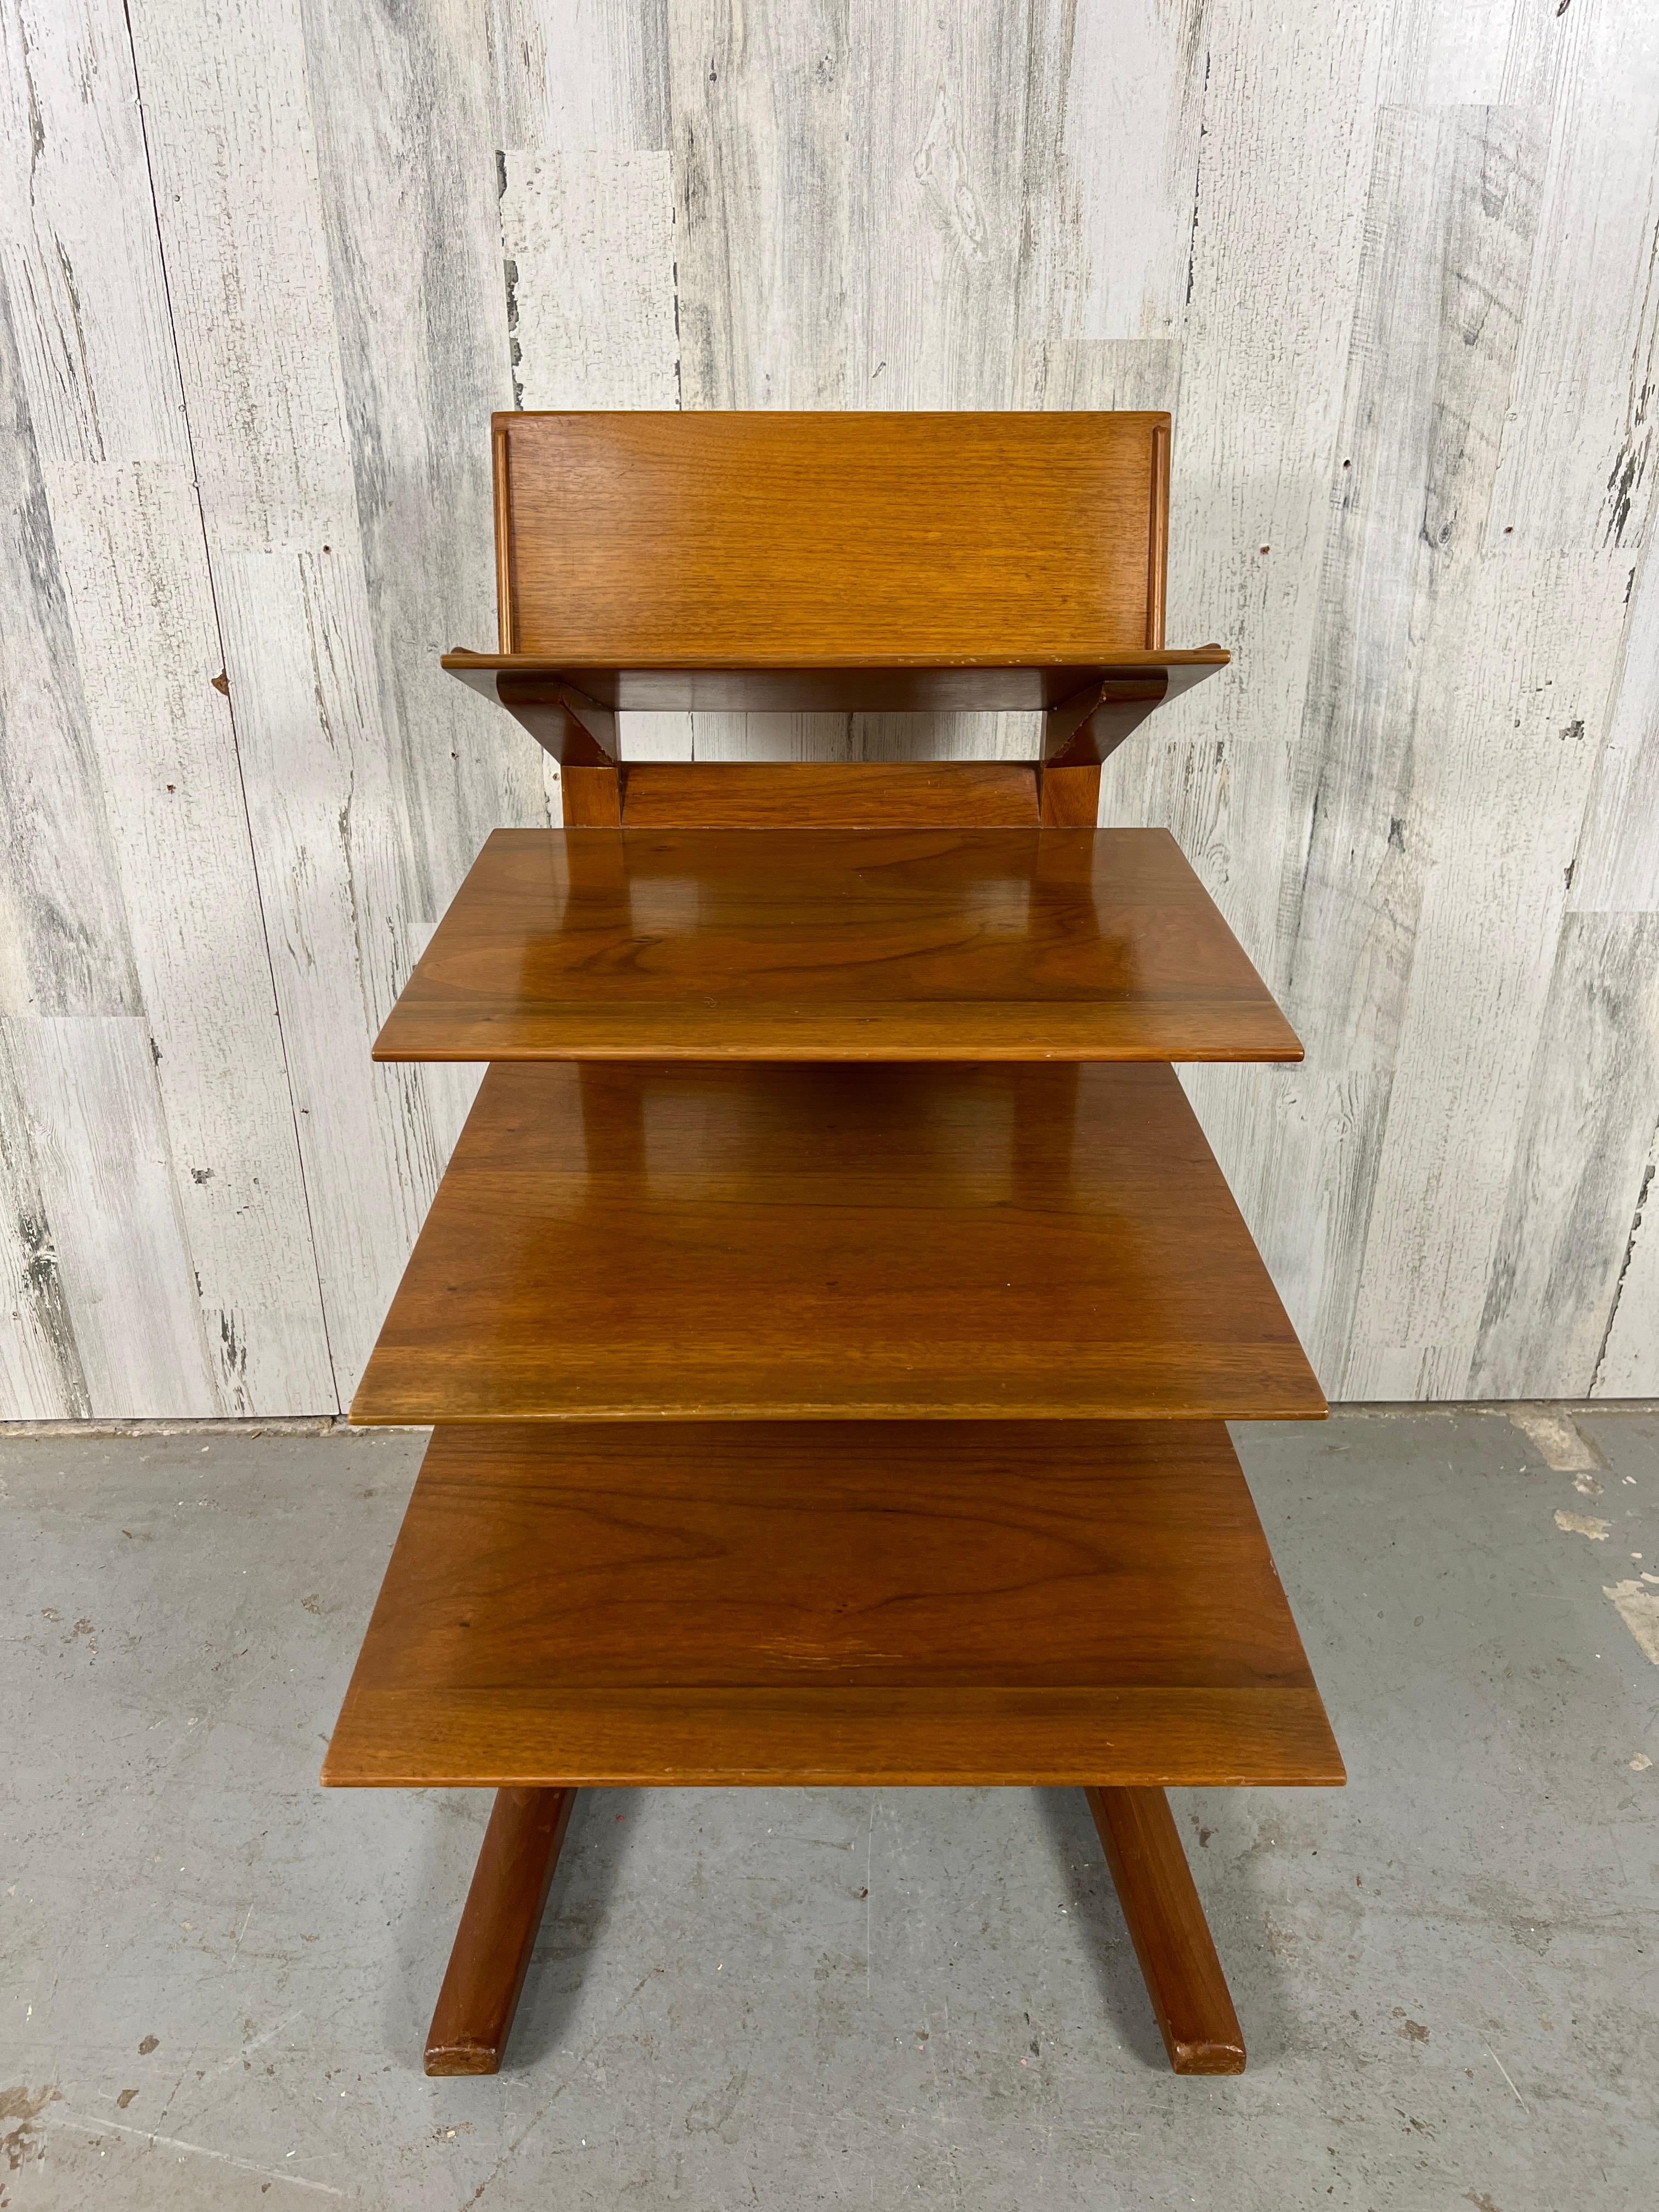 Edward Wormley for Dunbar magazine tree in walnut with four cantilevered shelves that get deeper as the order descends from top to bottom. A rare model introduced in 1953 and was only produced for two years. This table is original with a beautiful